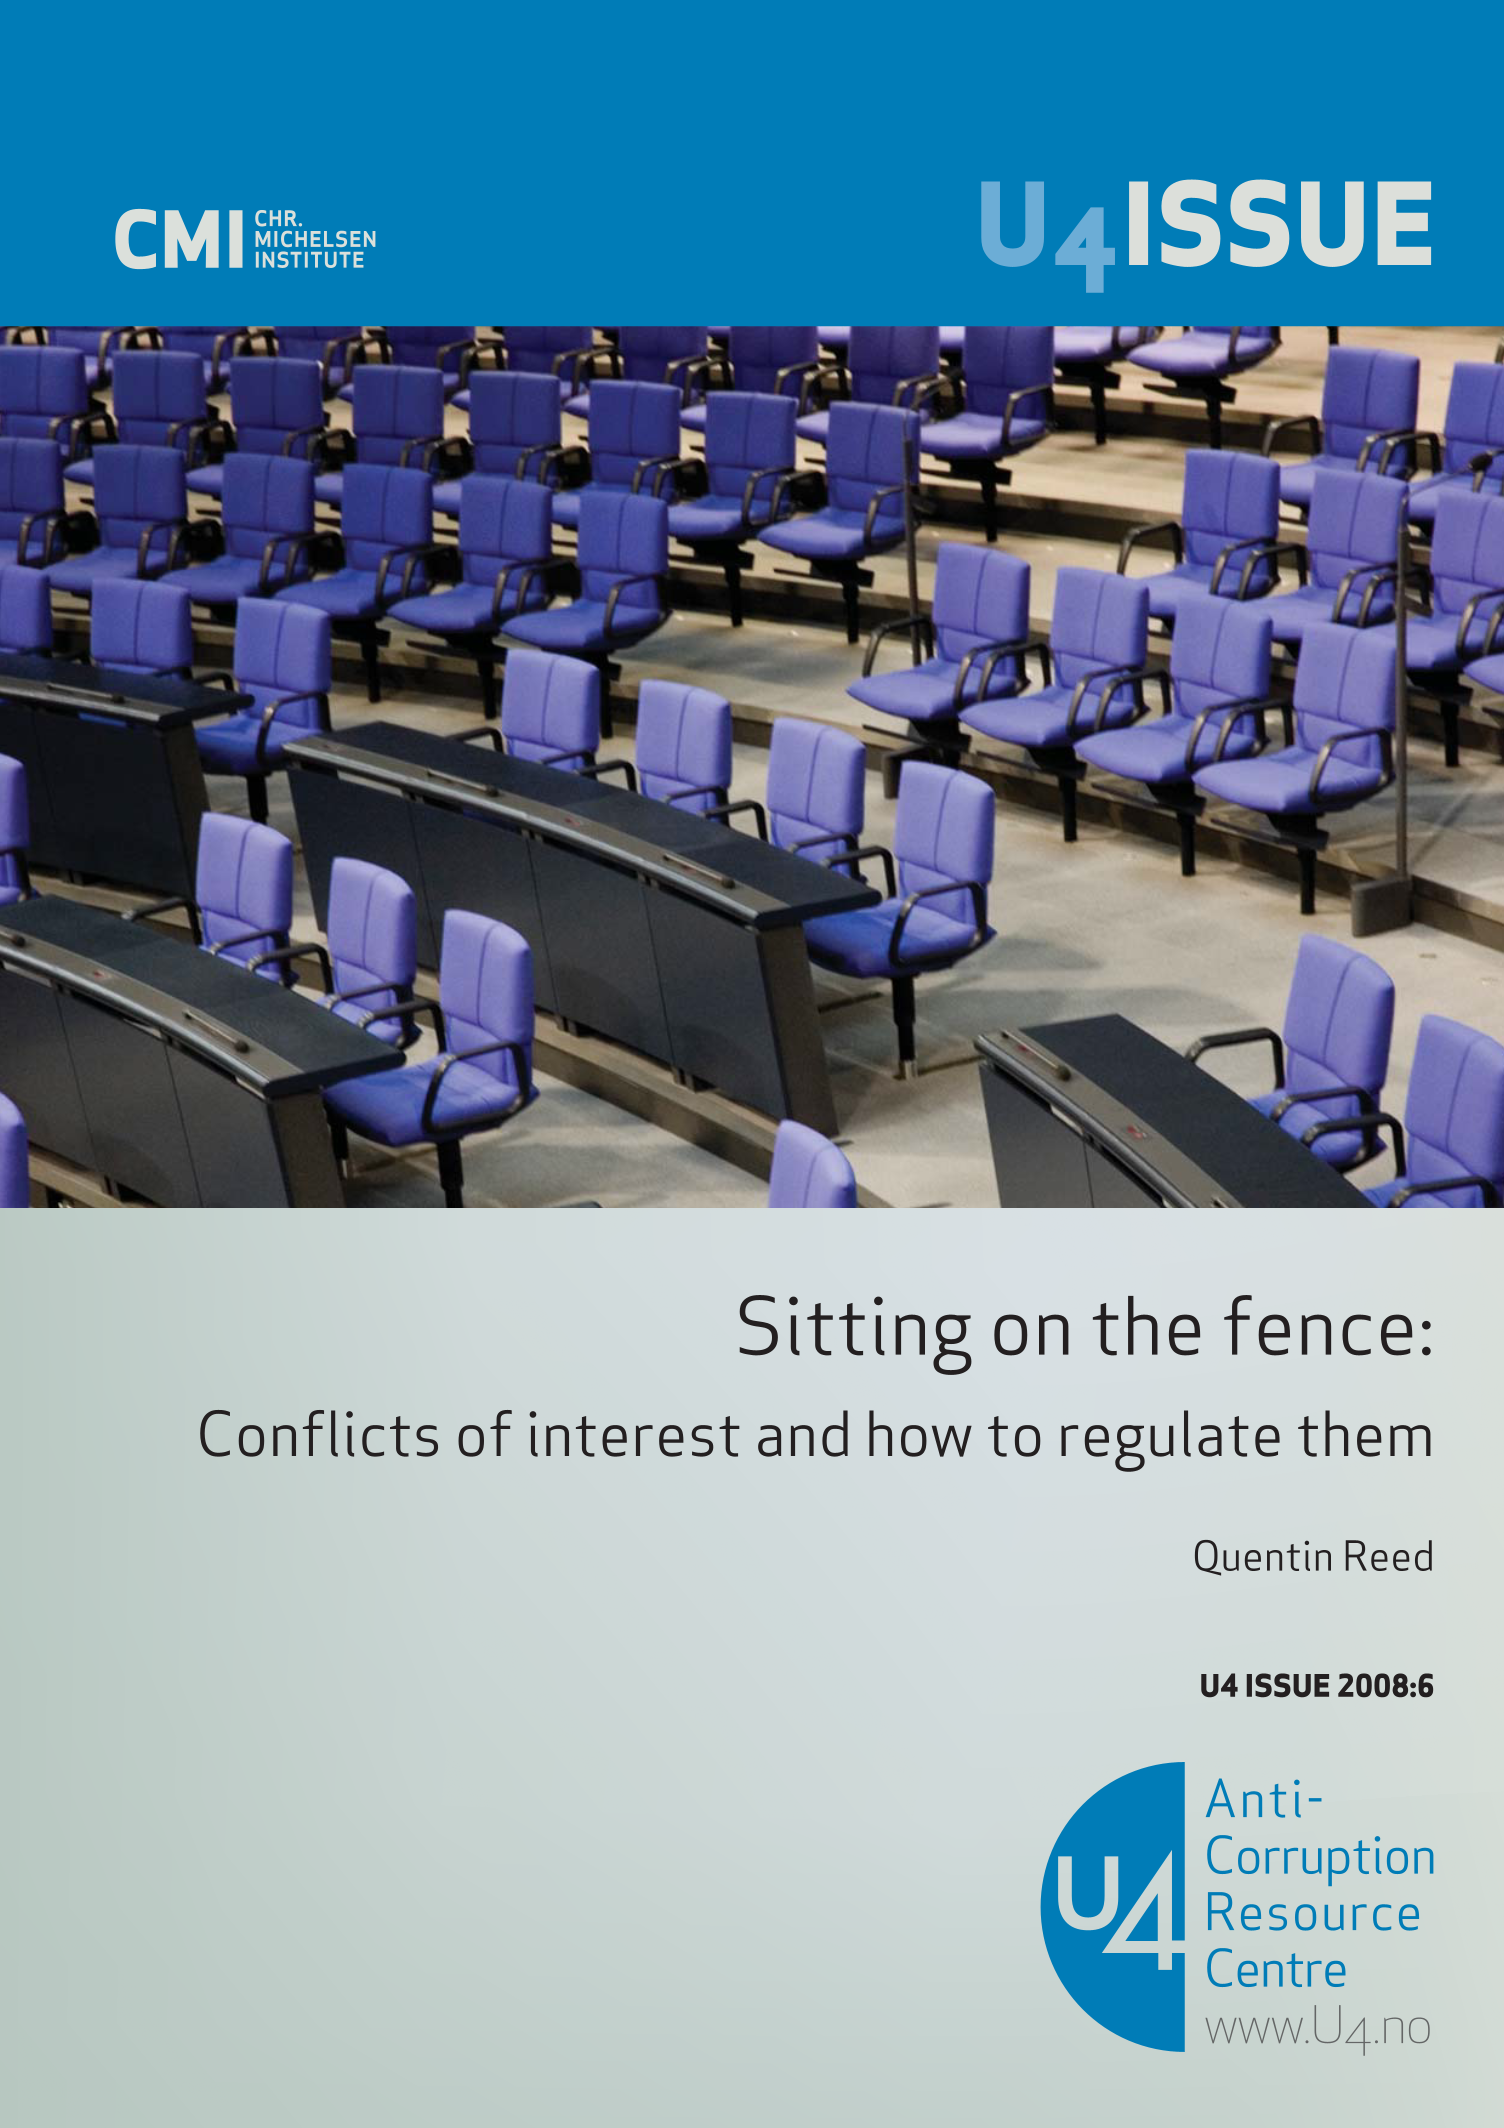 Sitting on the fence: Conflicts of interest and how to regulate them